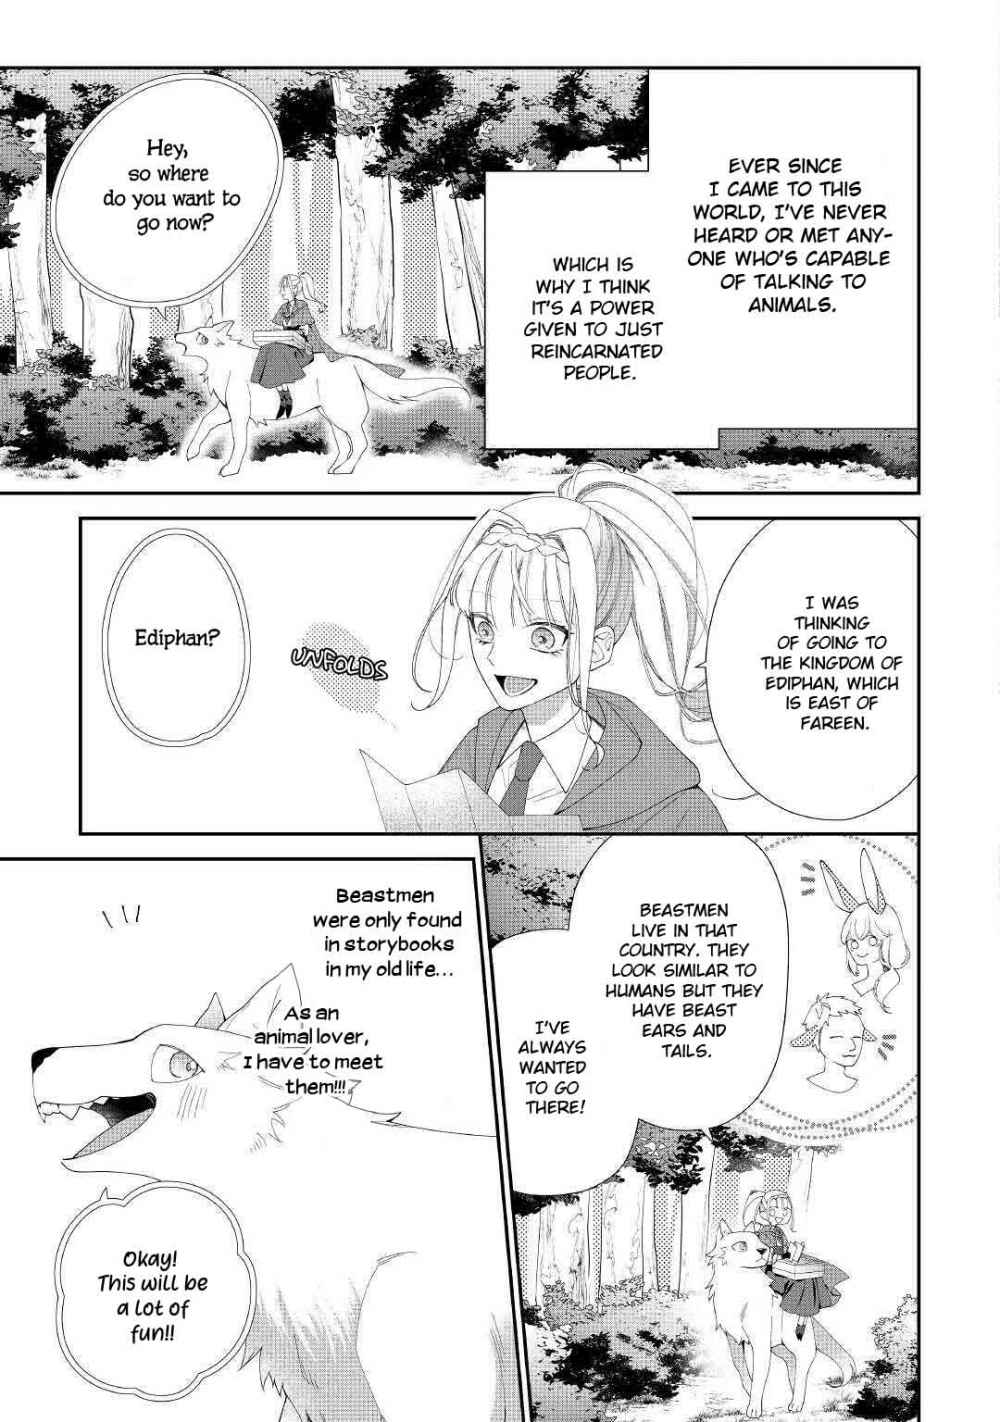 The Daughter Is A Former Veterinarian Has Been Abandoned, But Is Very Popular With Mofumofu! - Page 2